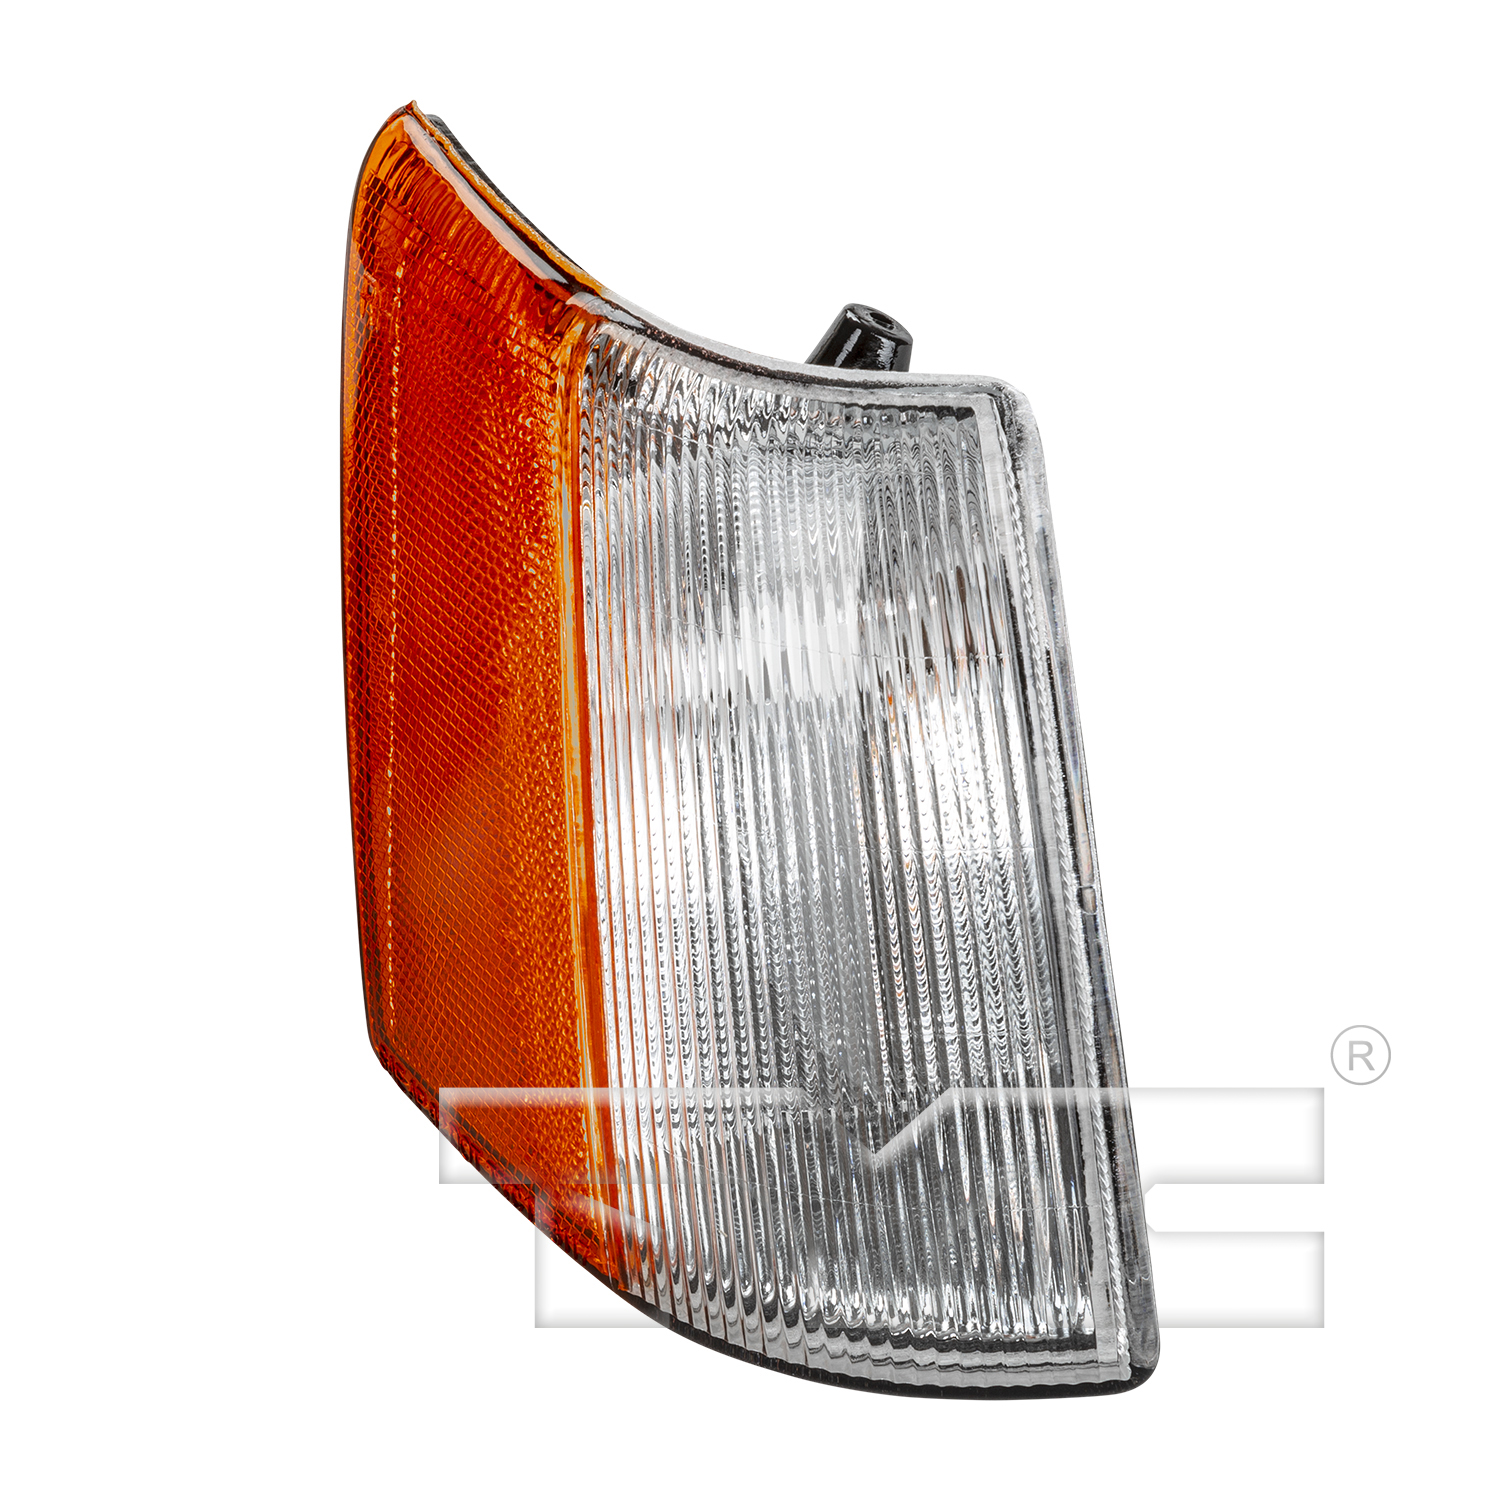 Aftermarket LAMPS for JEEP - GRAND CHEROKEE, GRAND CHEROKEE,93-98,RT Parklamp assy